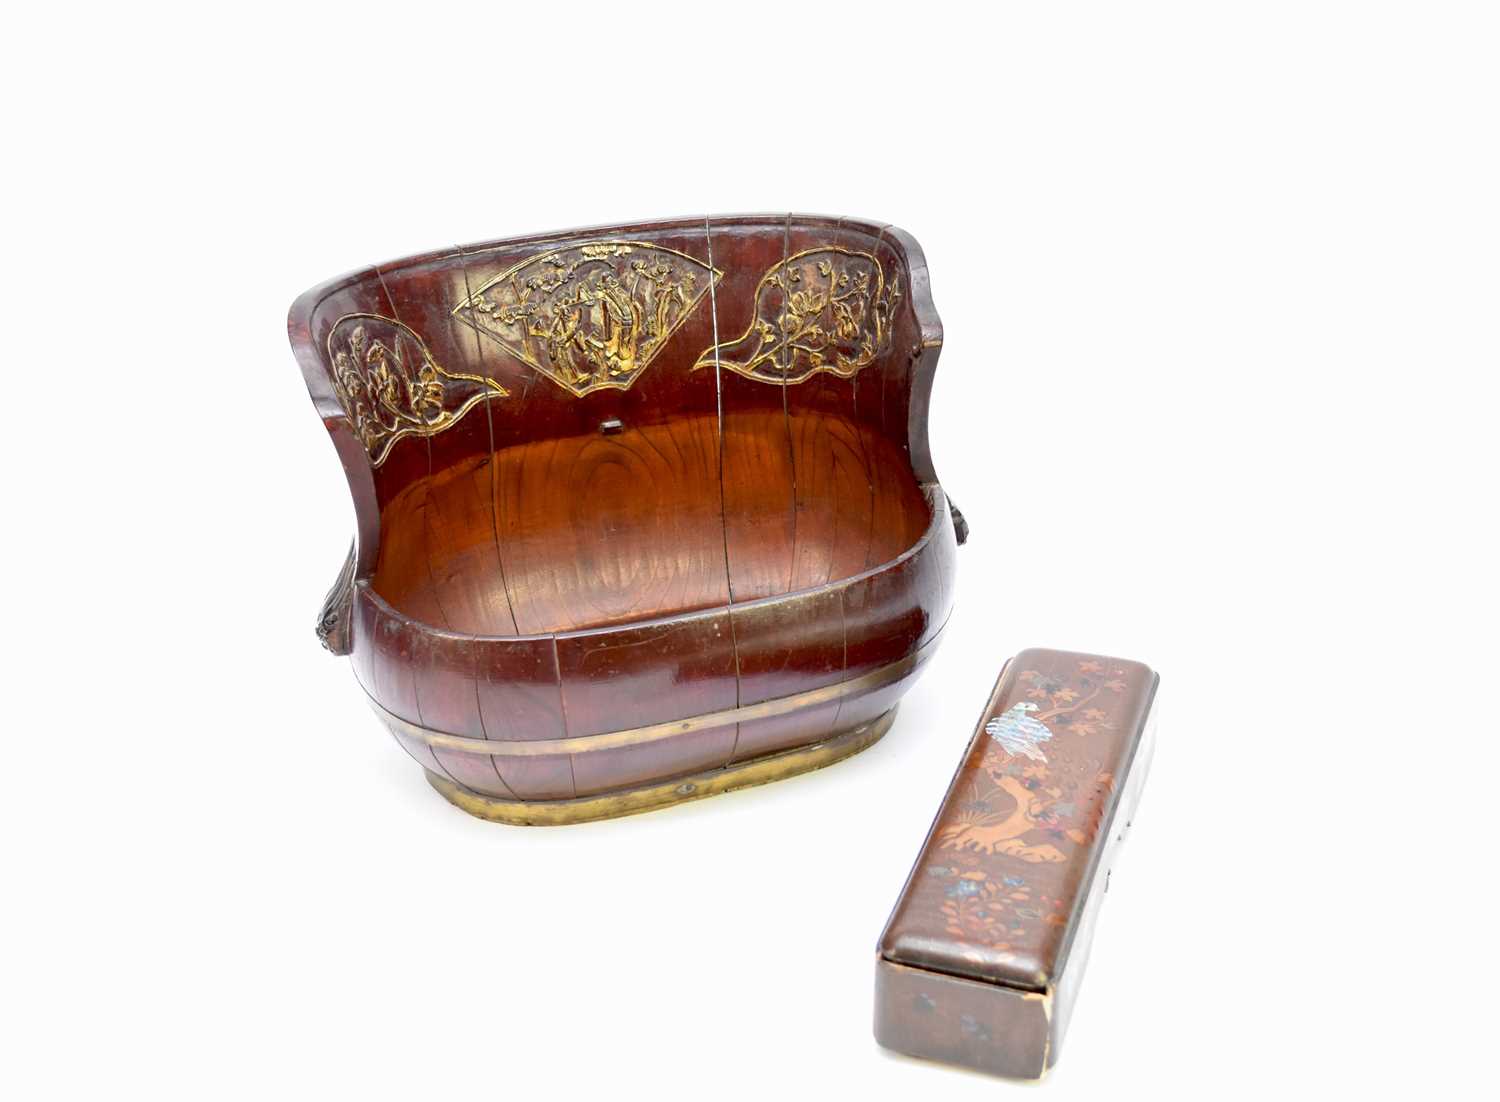 A Chinese lacquered bamboo basket and a Japanese lacquer box